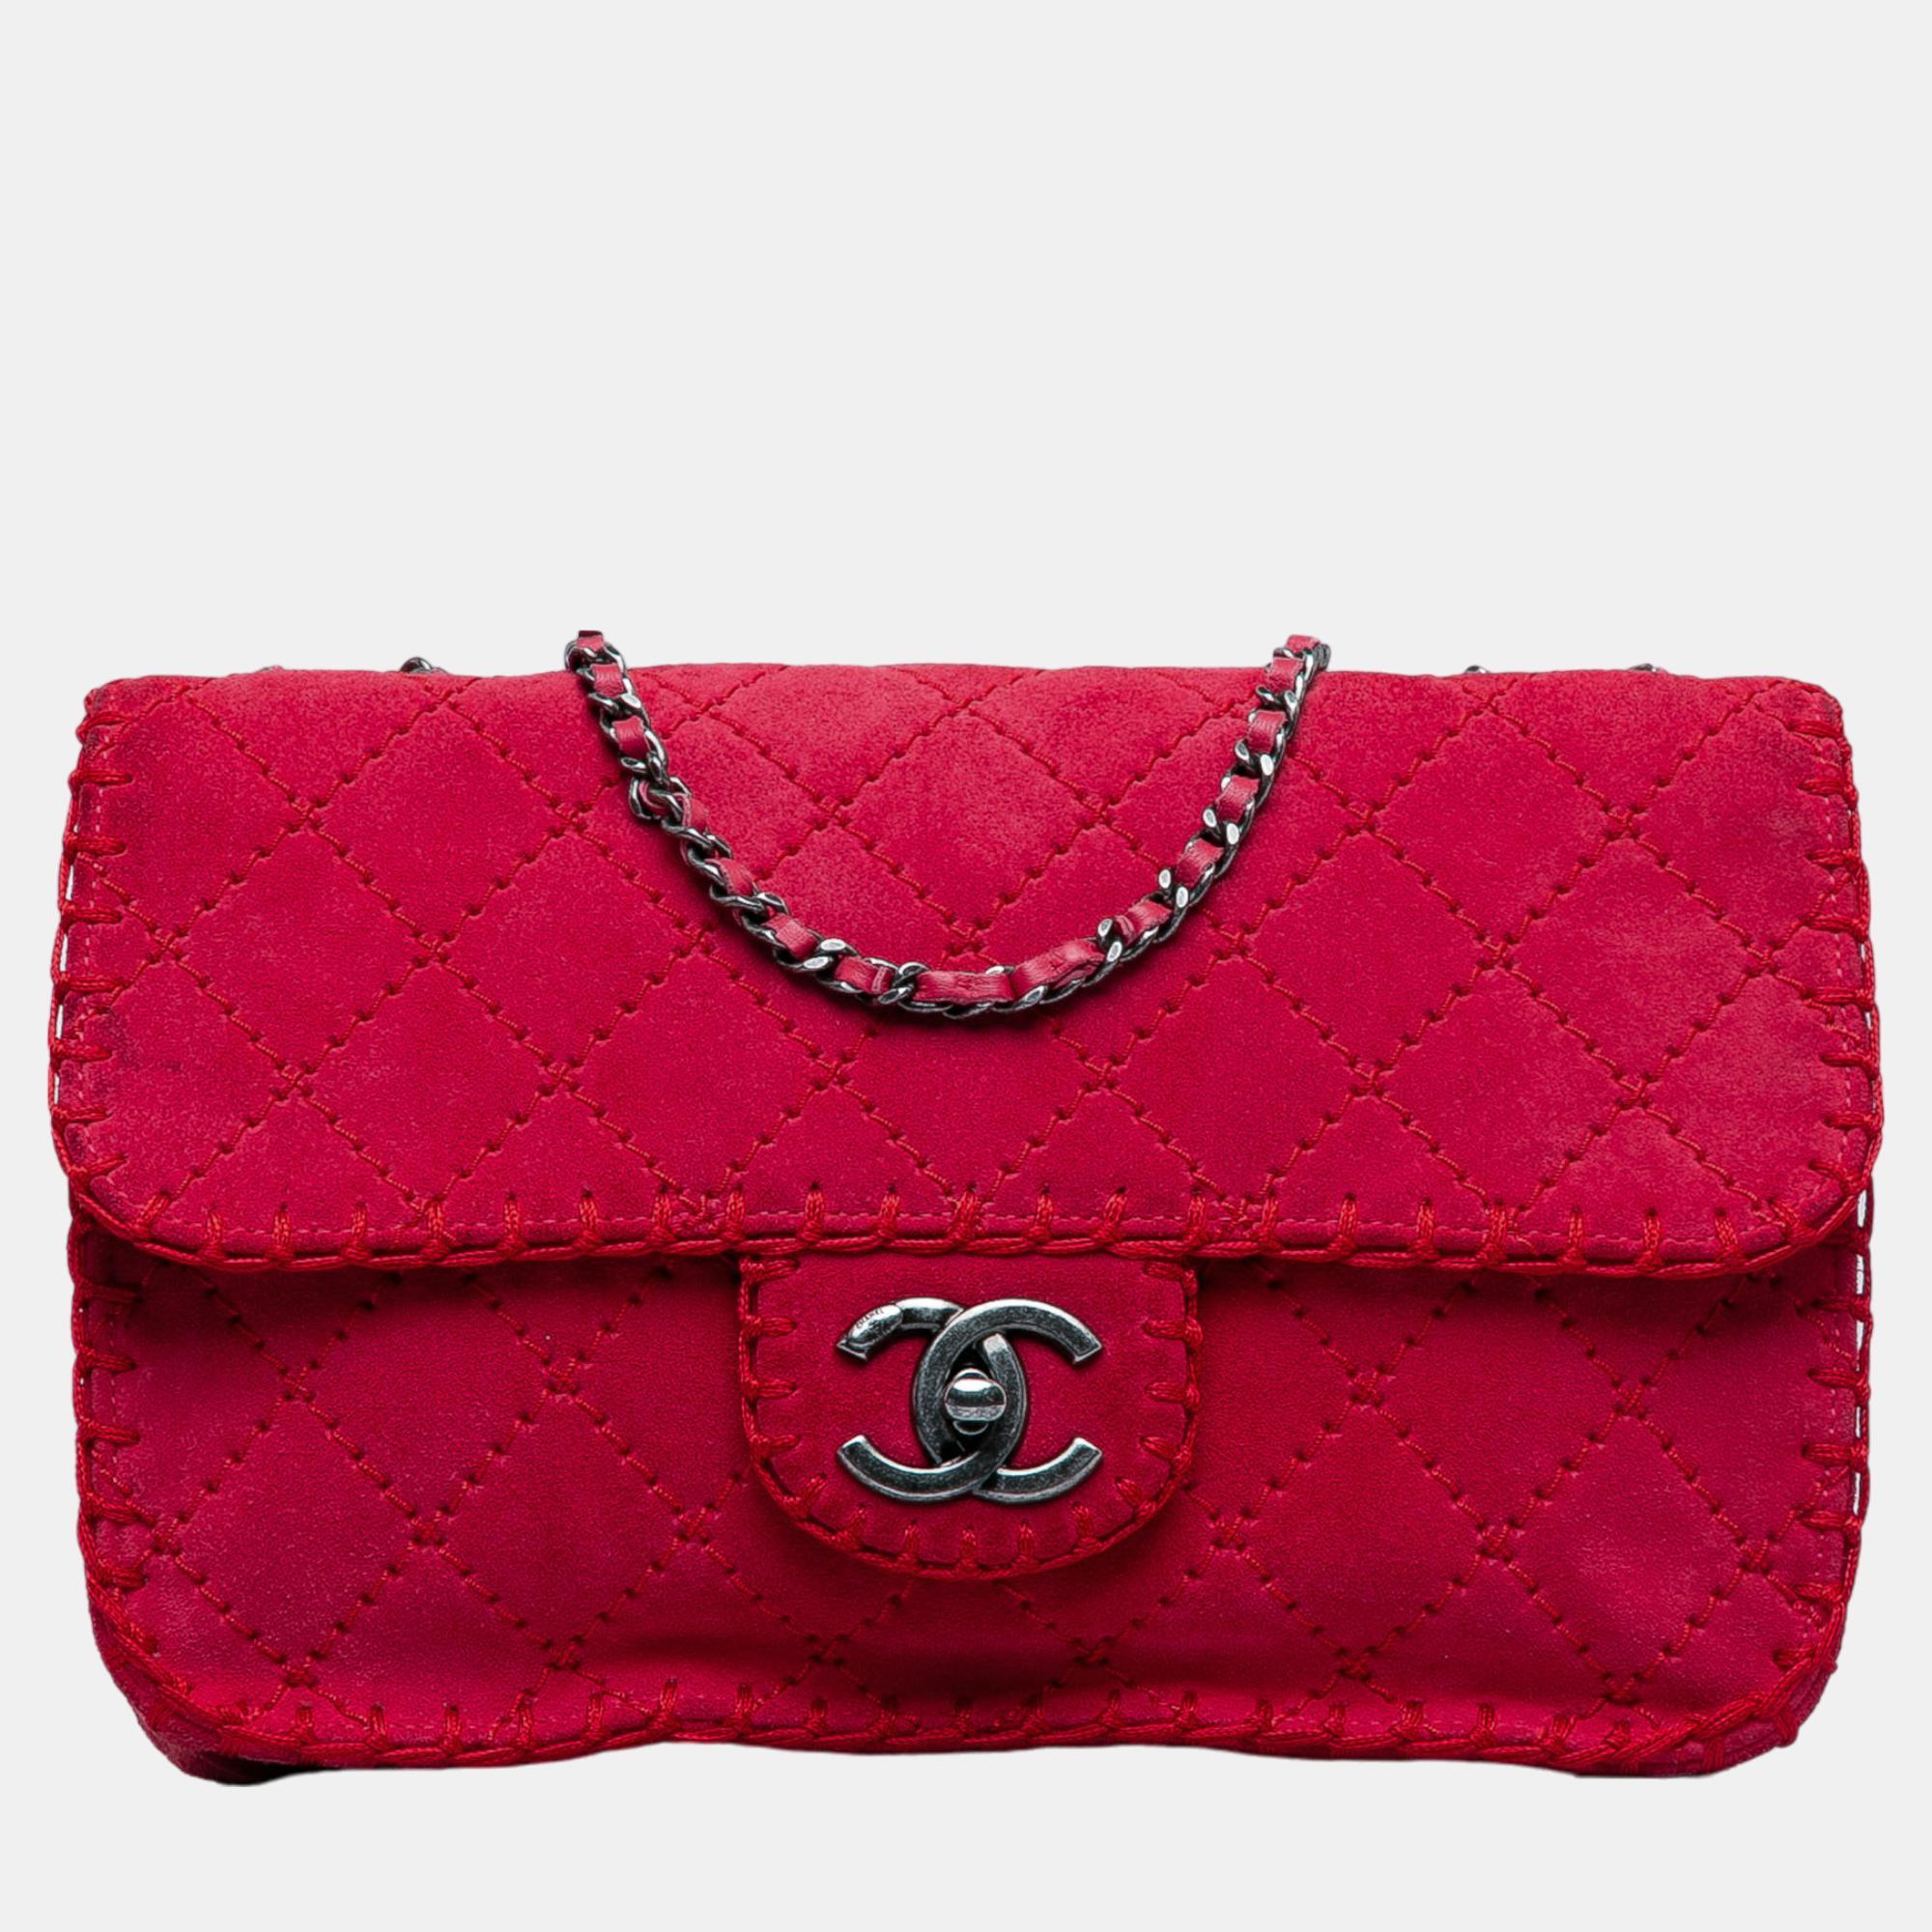 

Chanel Pink Medium Quilted Suede Stitched Single Flap